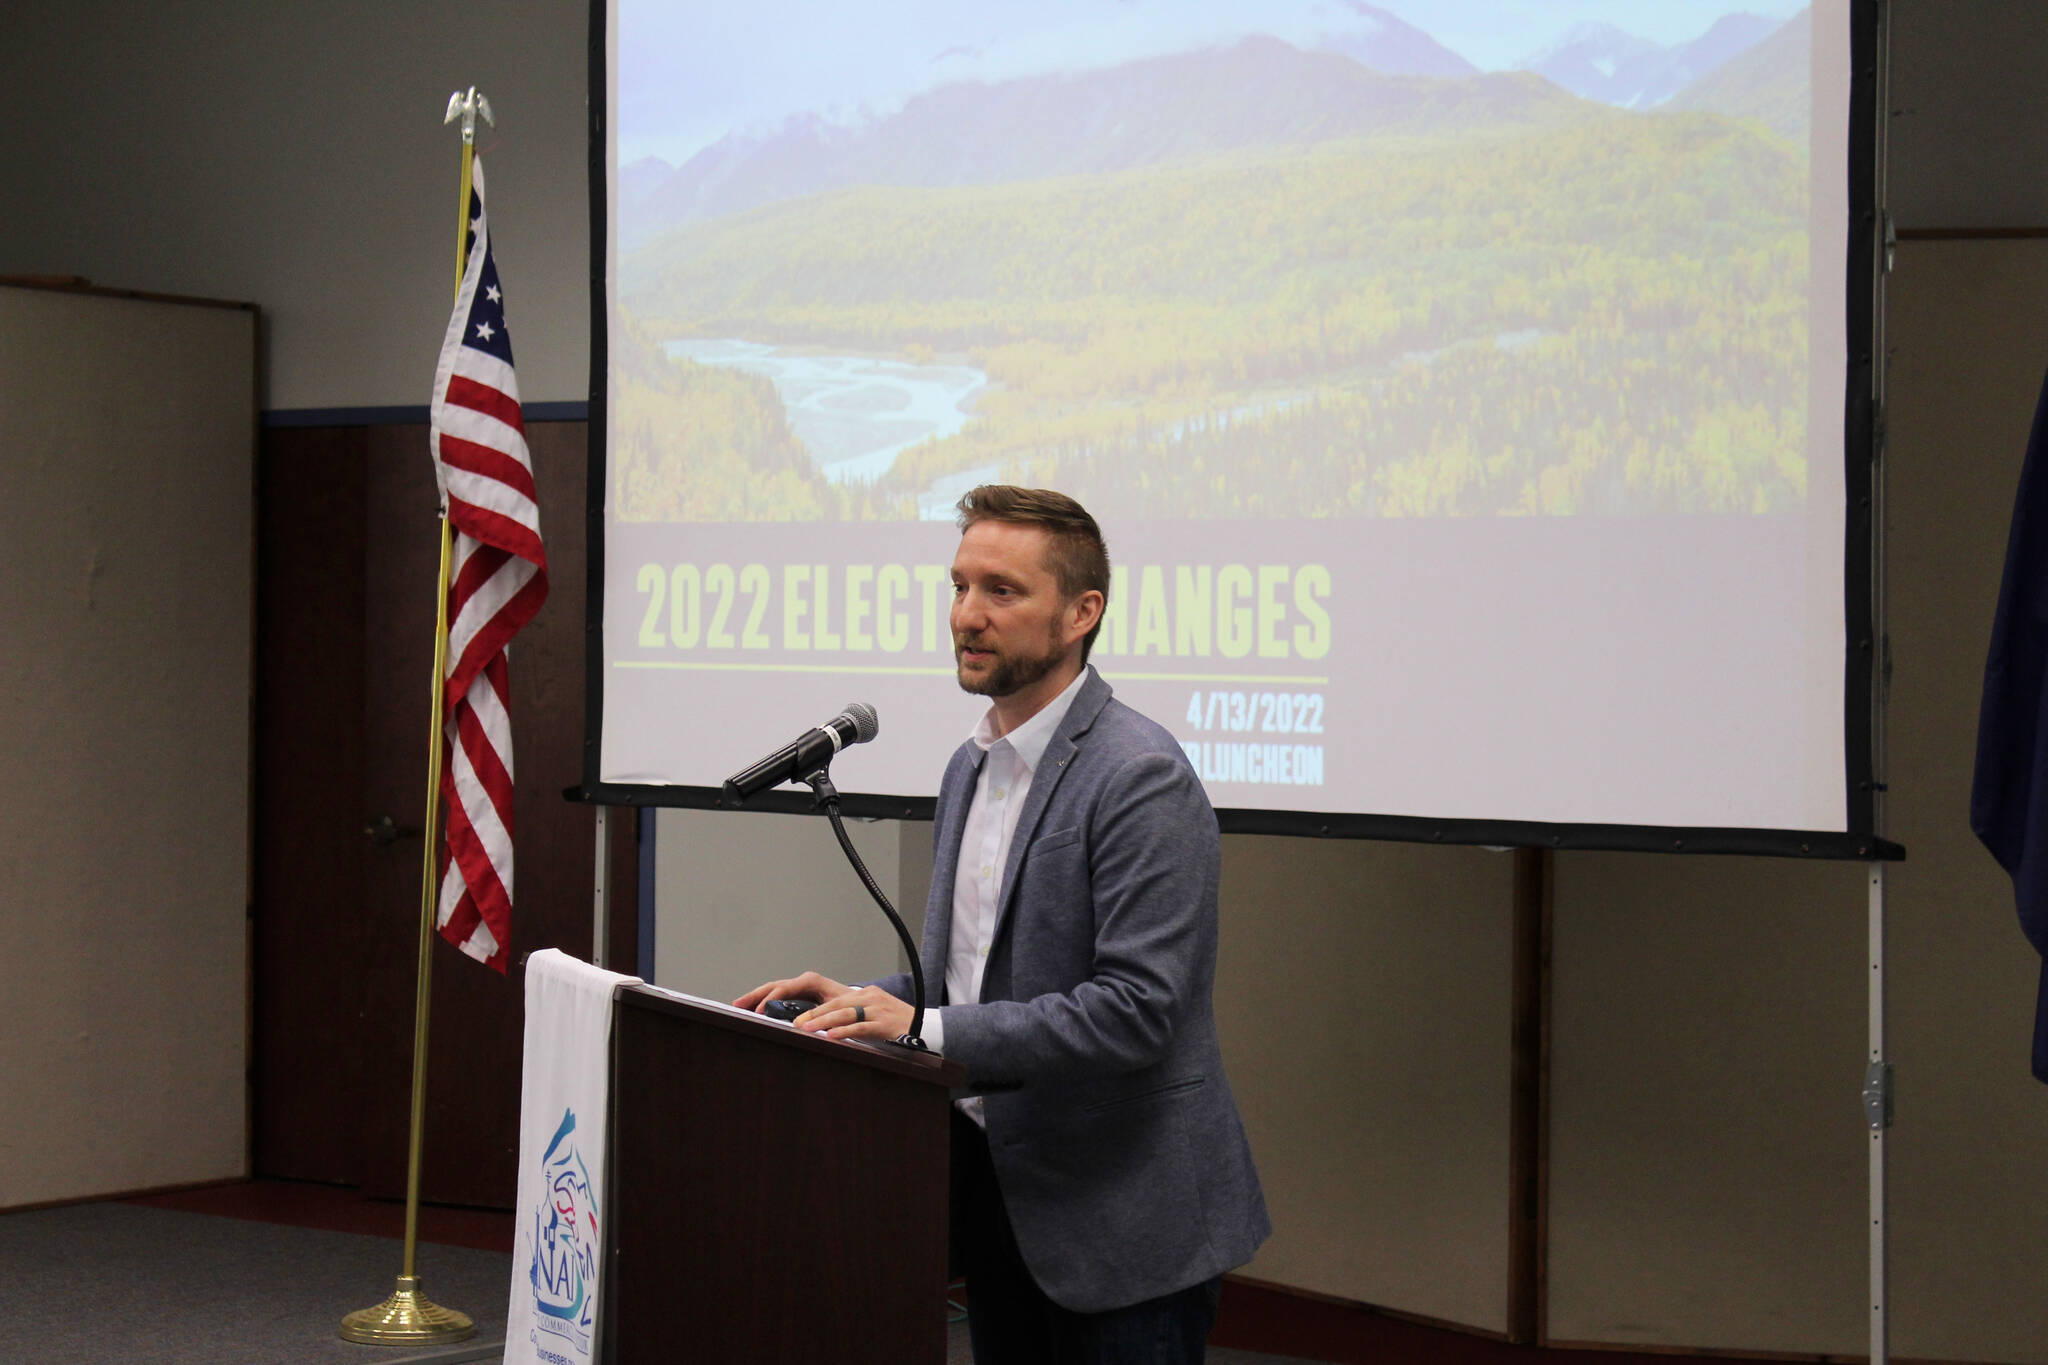 Alaskans for Better Elections Executive Director Jason Grenn presents information about Alaska’s news election systems during a joint chamber of commerce luncheon on Wednesday, April 13, 2022 in Kenai, Alaska. (Ashlyn O’Hara/Peninsula Clarion)